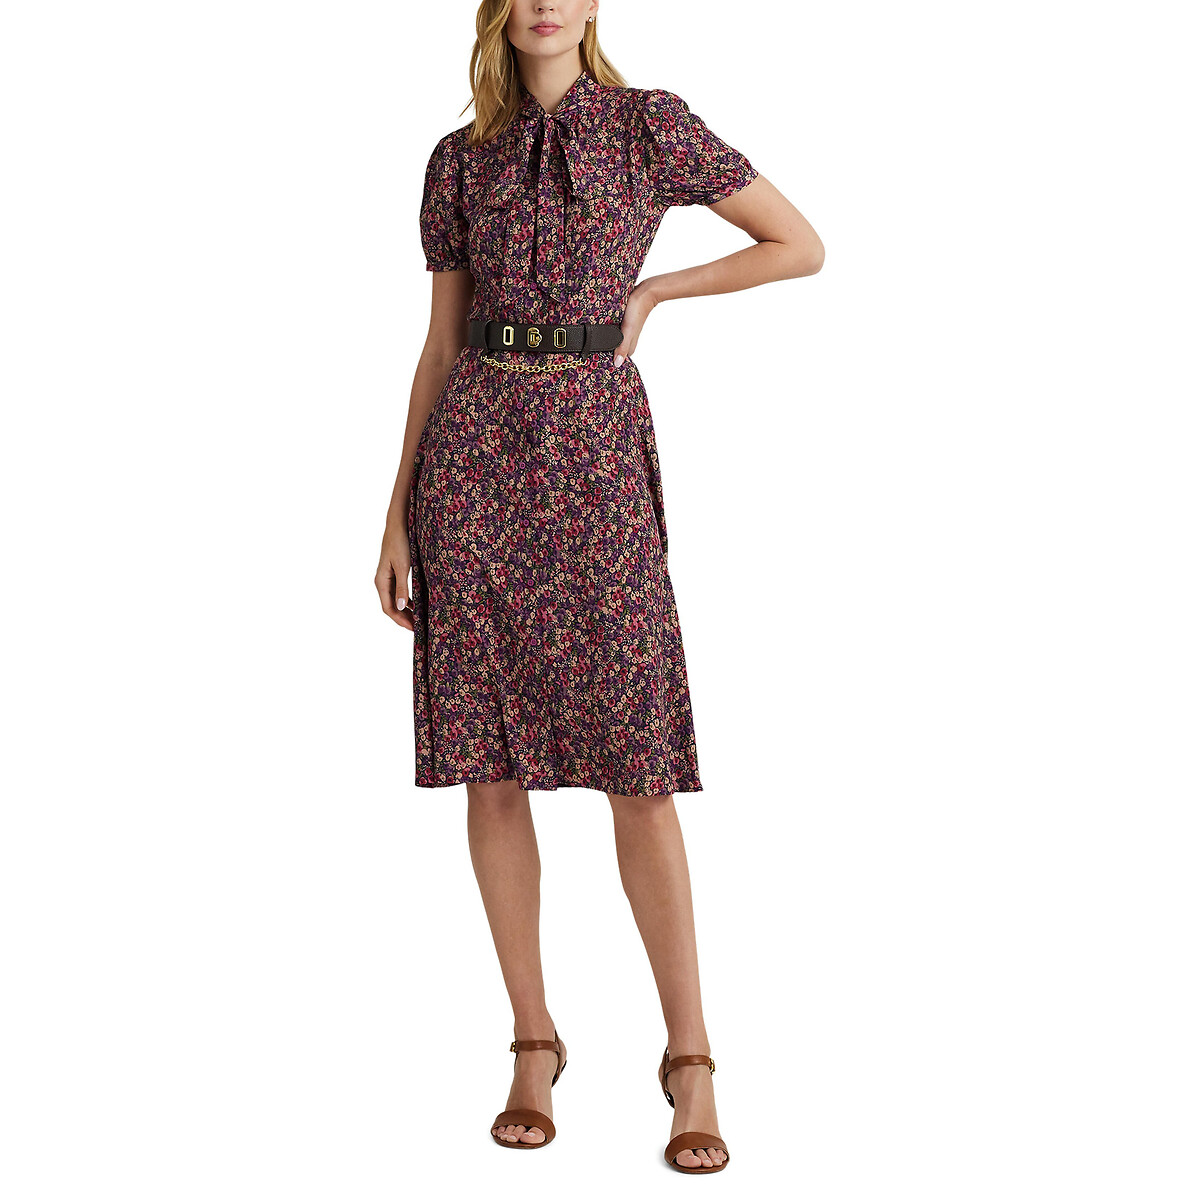 Zachari Floral Print Dress with Short Sleeves